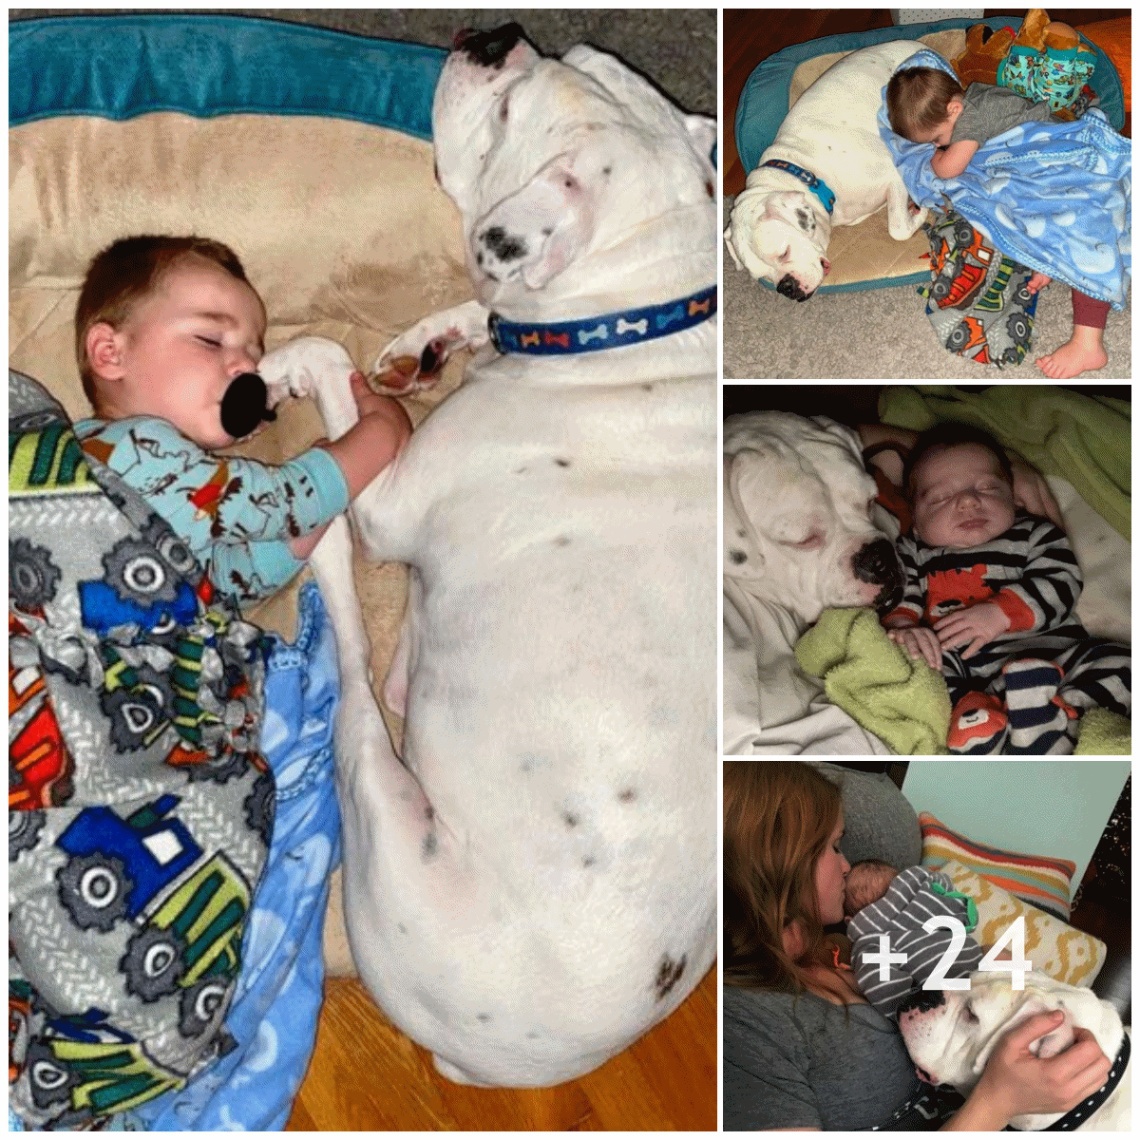 The adorable picture of the baby and the dog next to the bed, watching over his back, were both captured by the camera.